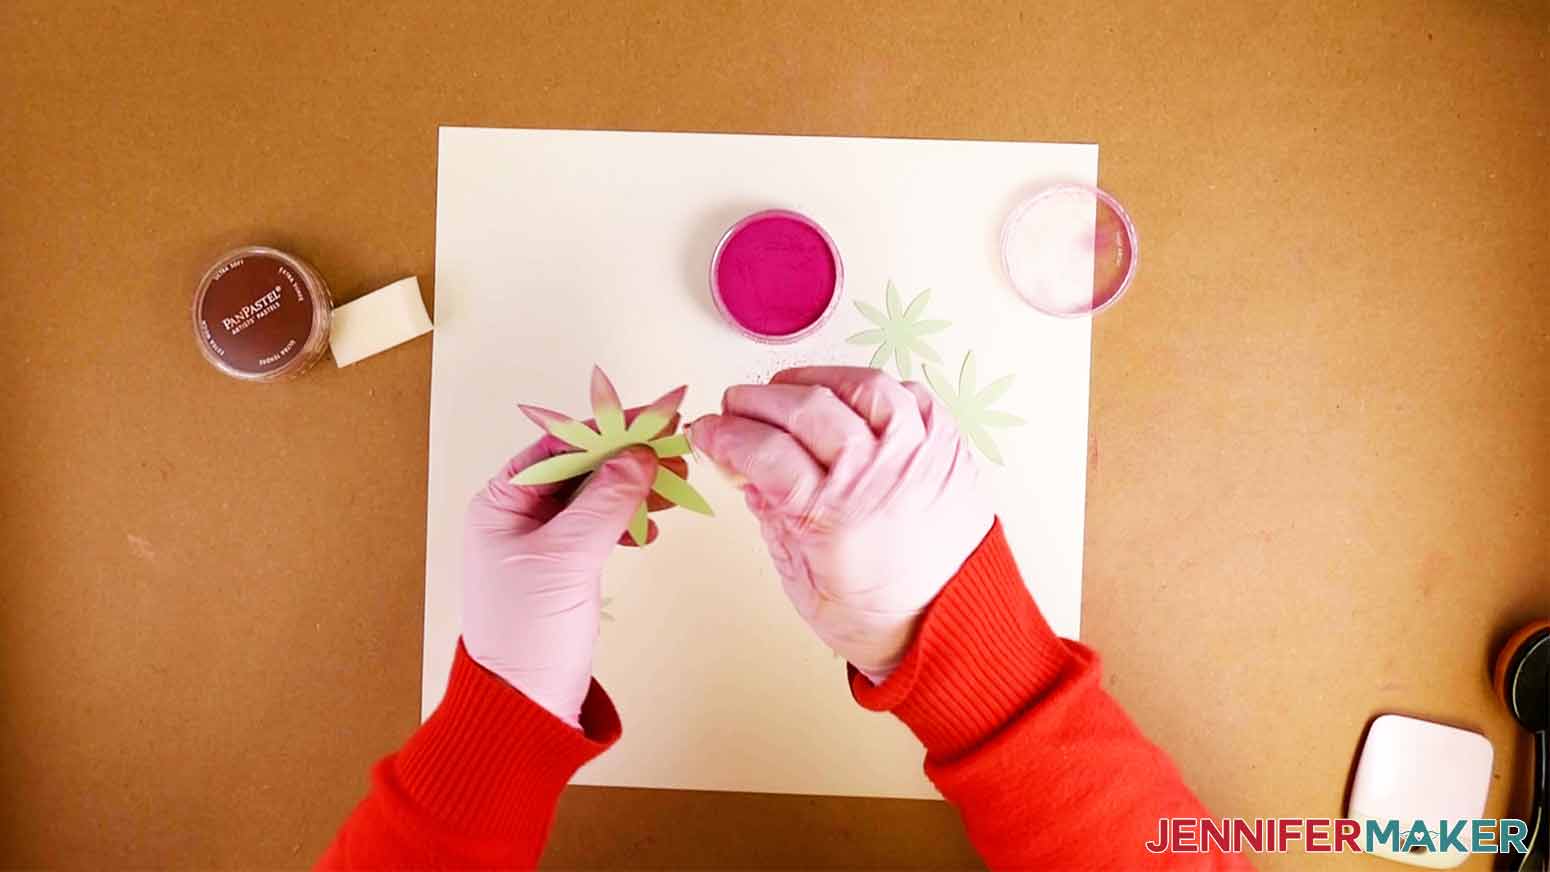 Add color to the edges of the succulent pieces when making my paper succulents project